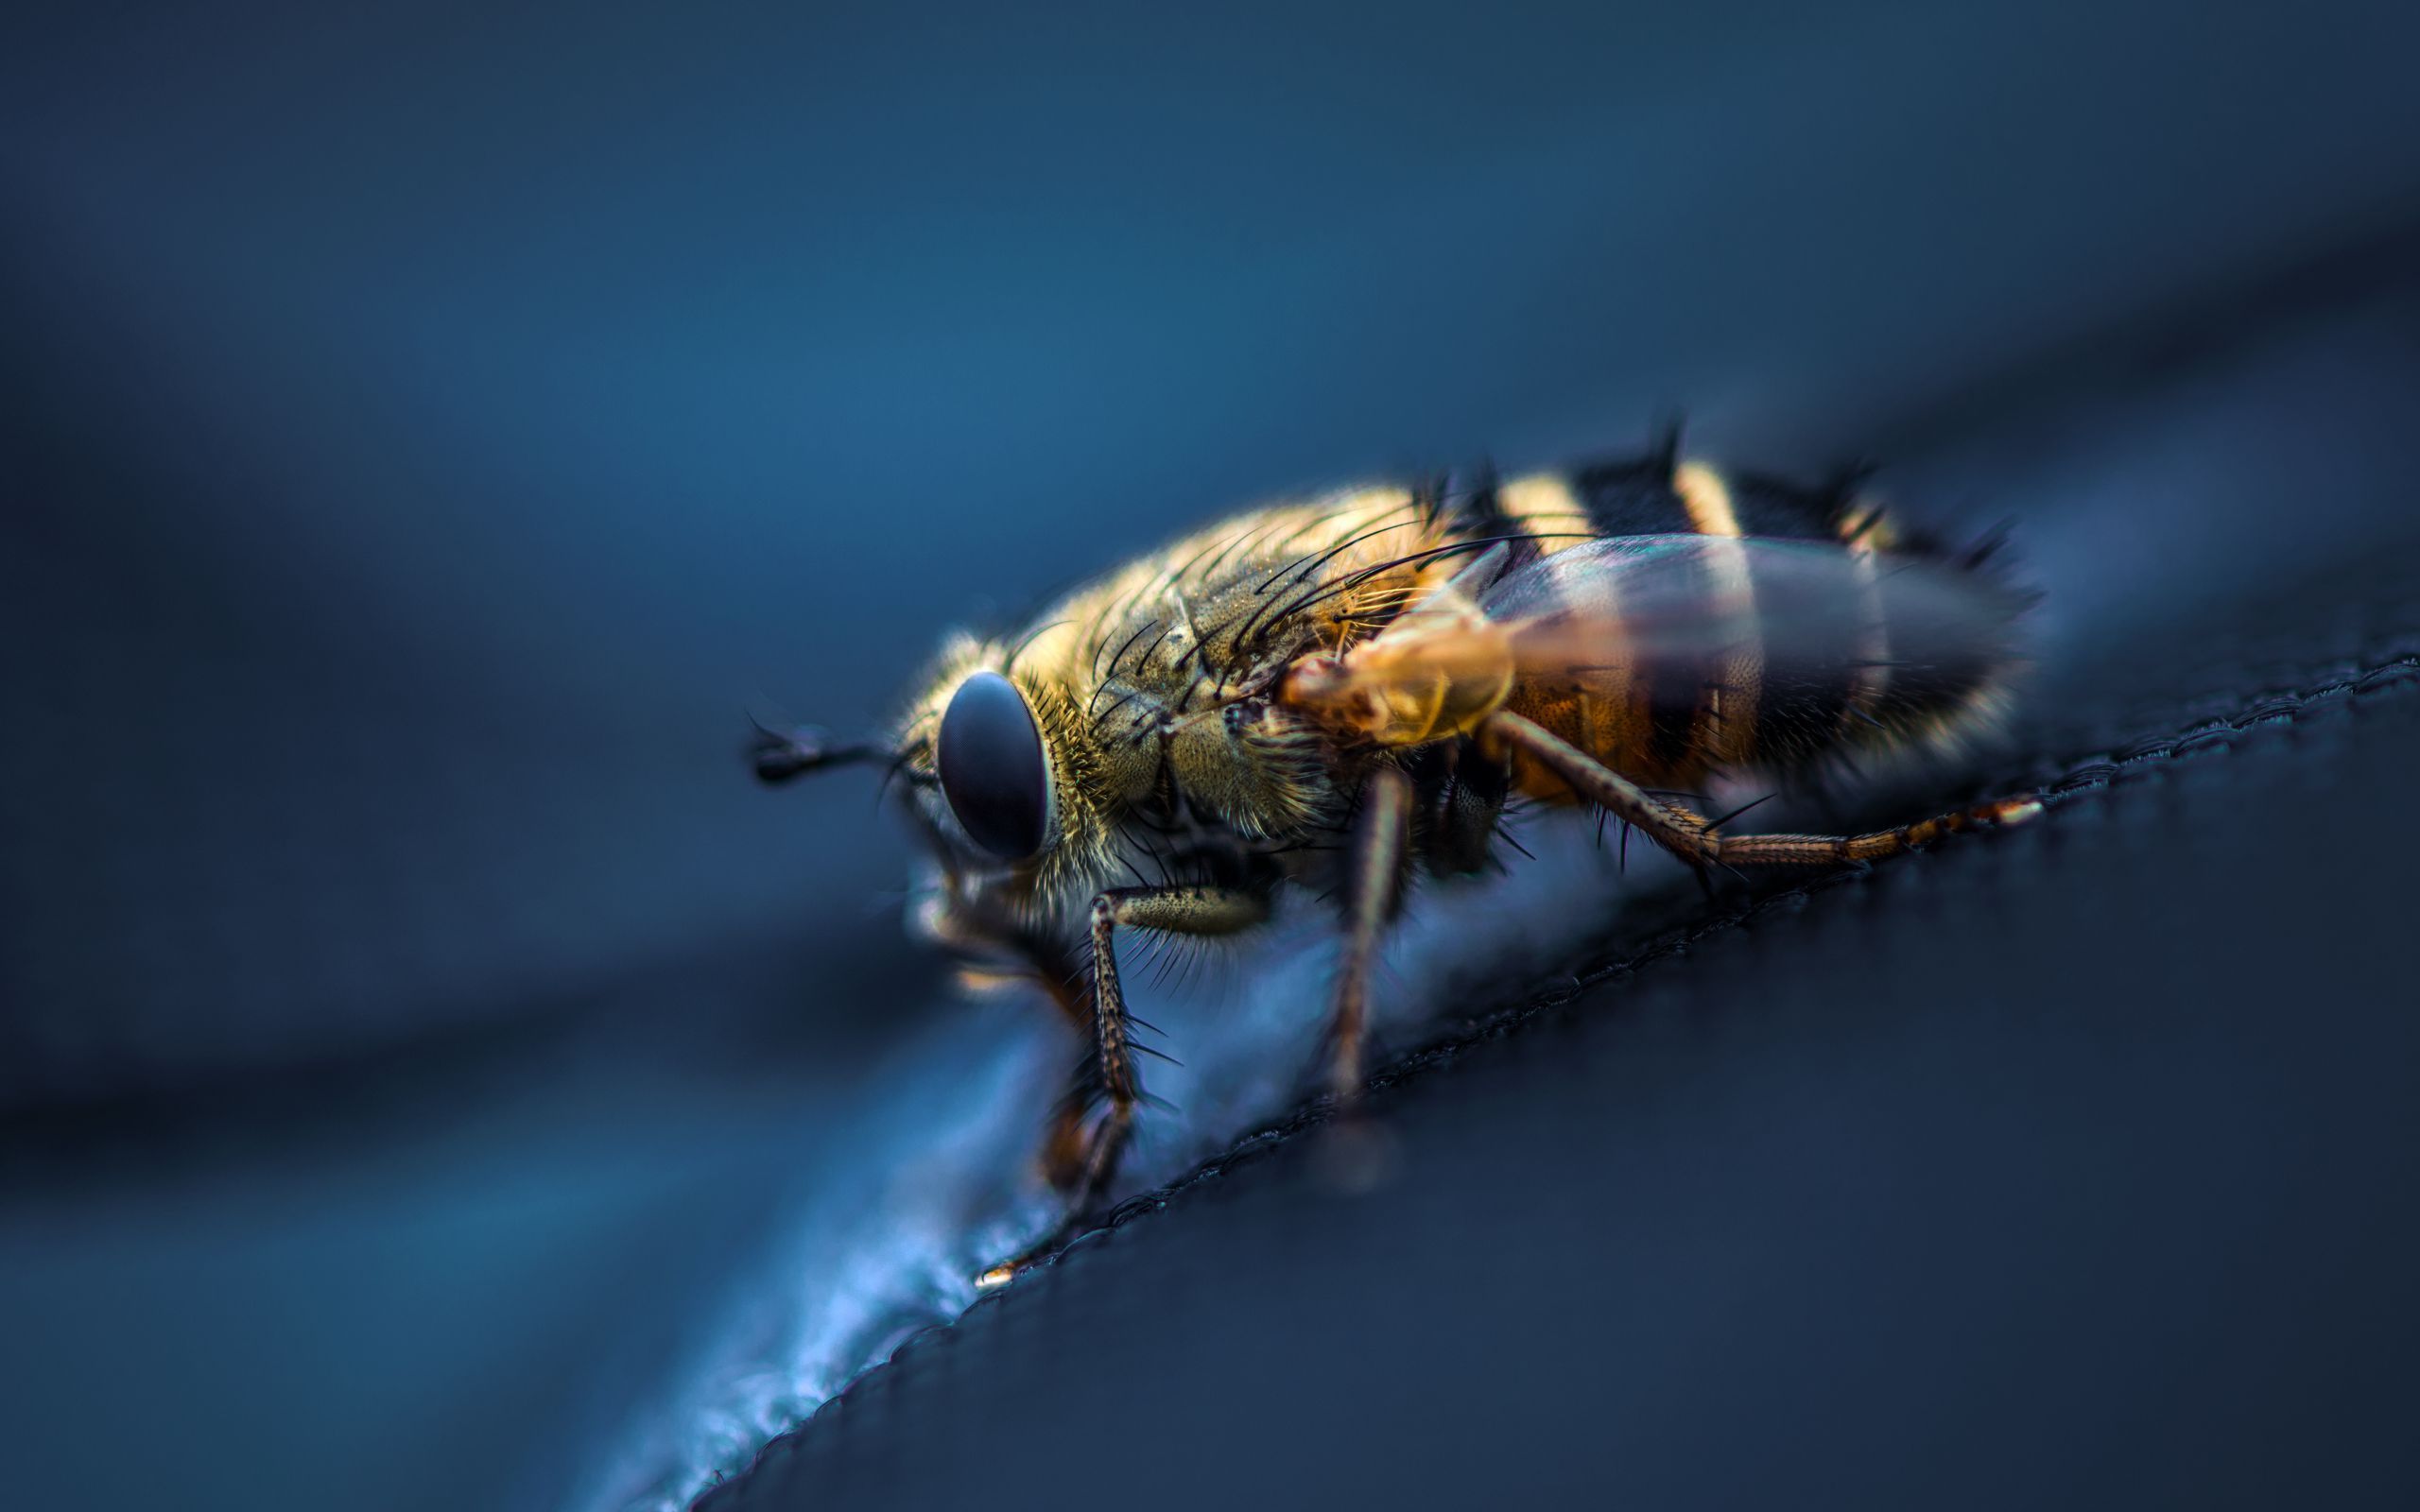 Download wallpaper 2560x1600 fly, insect, macro, eyes, wings